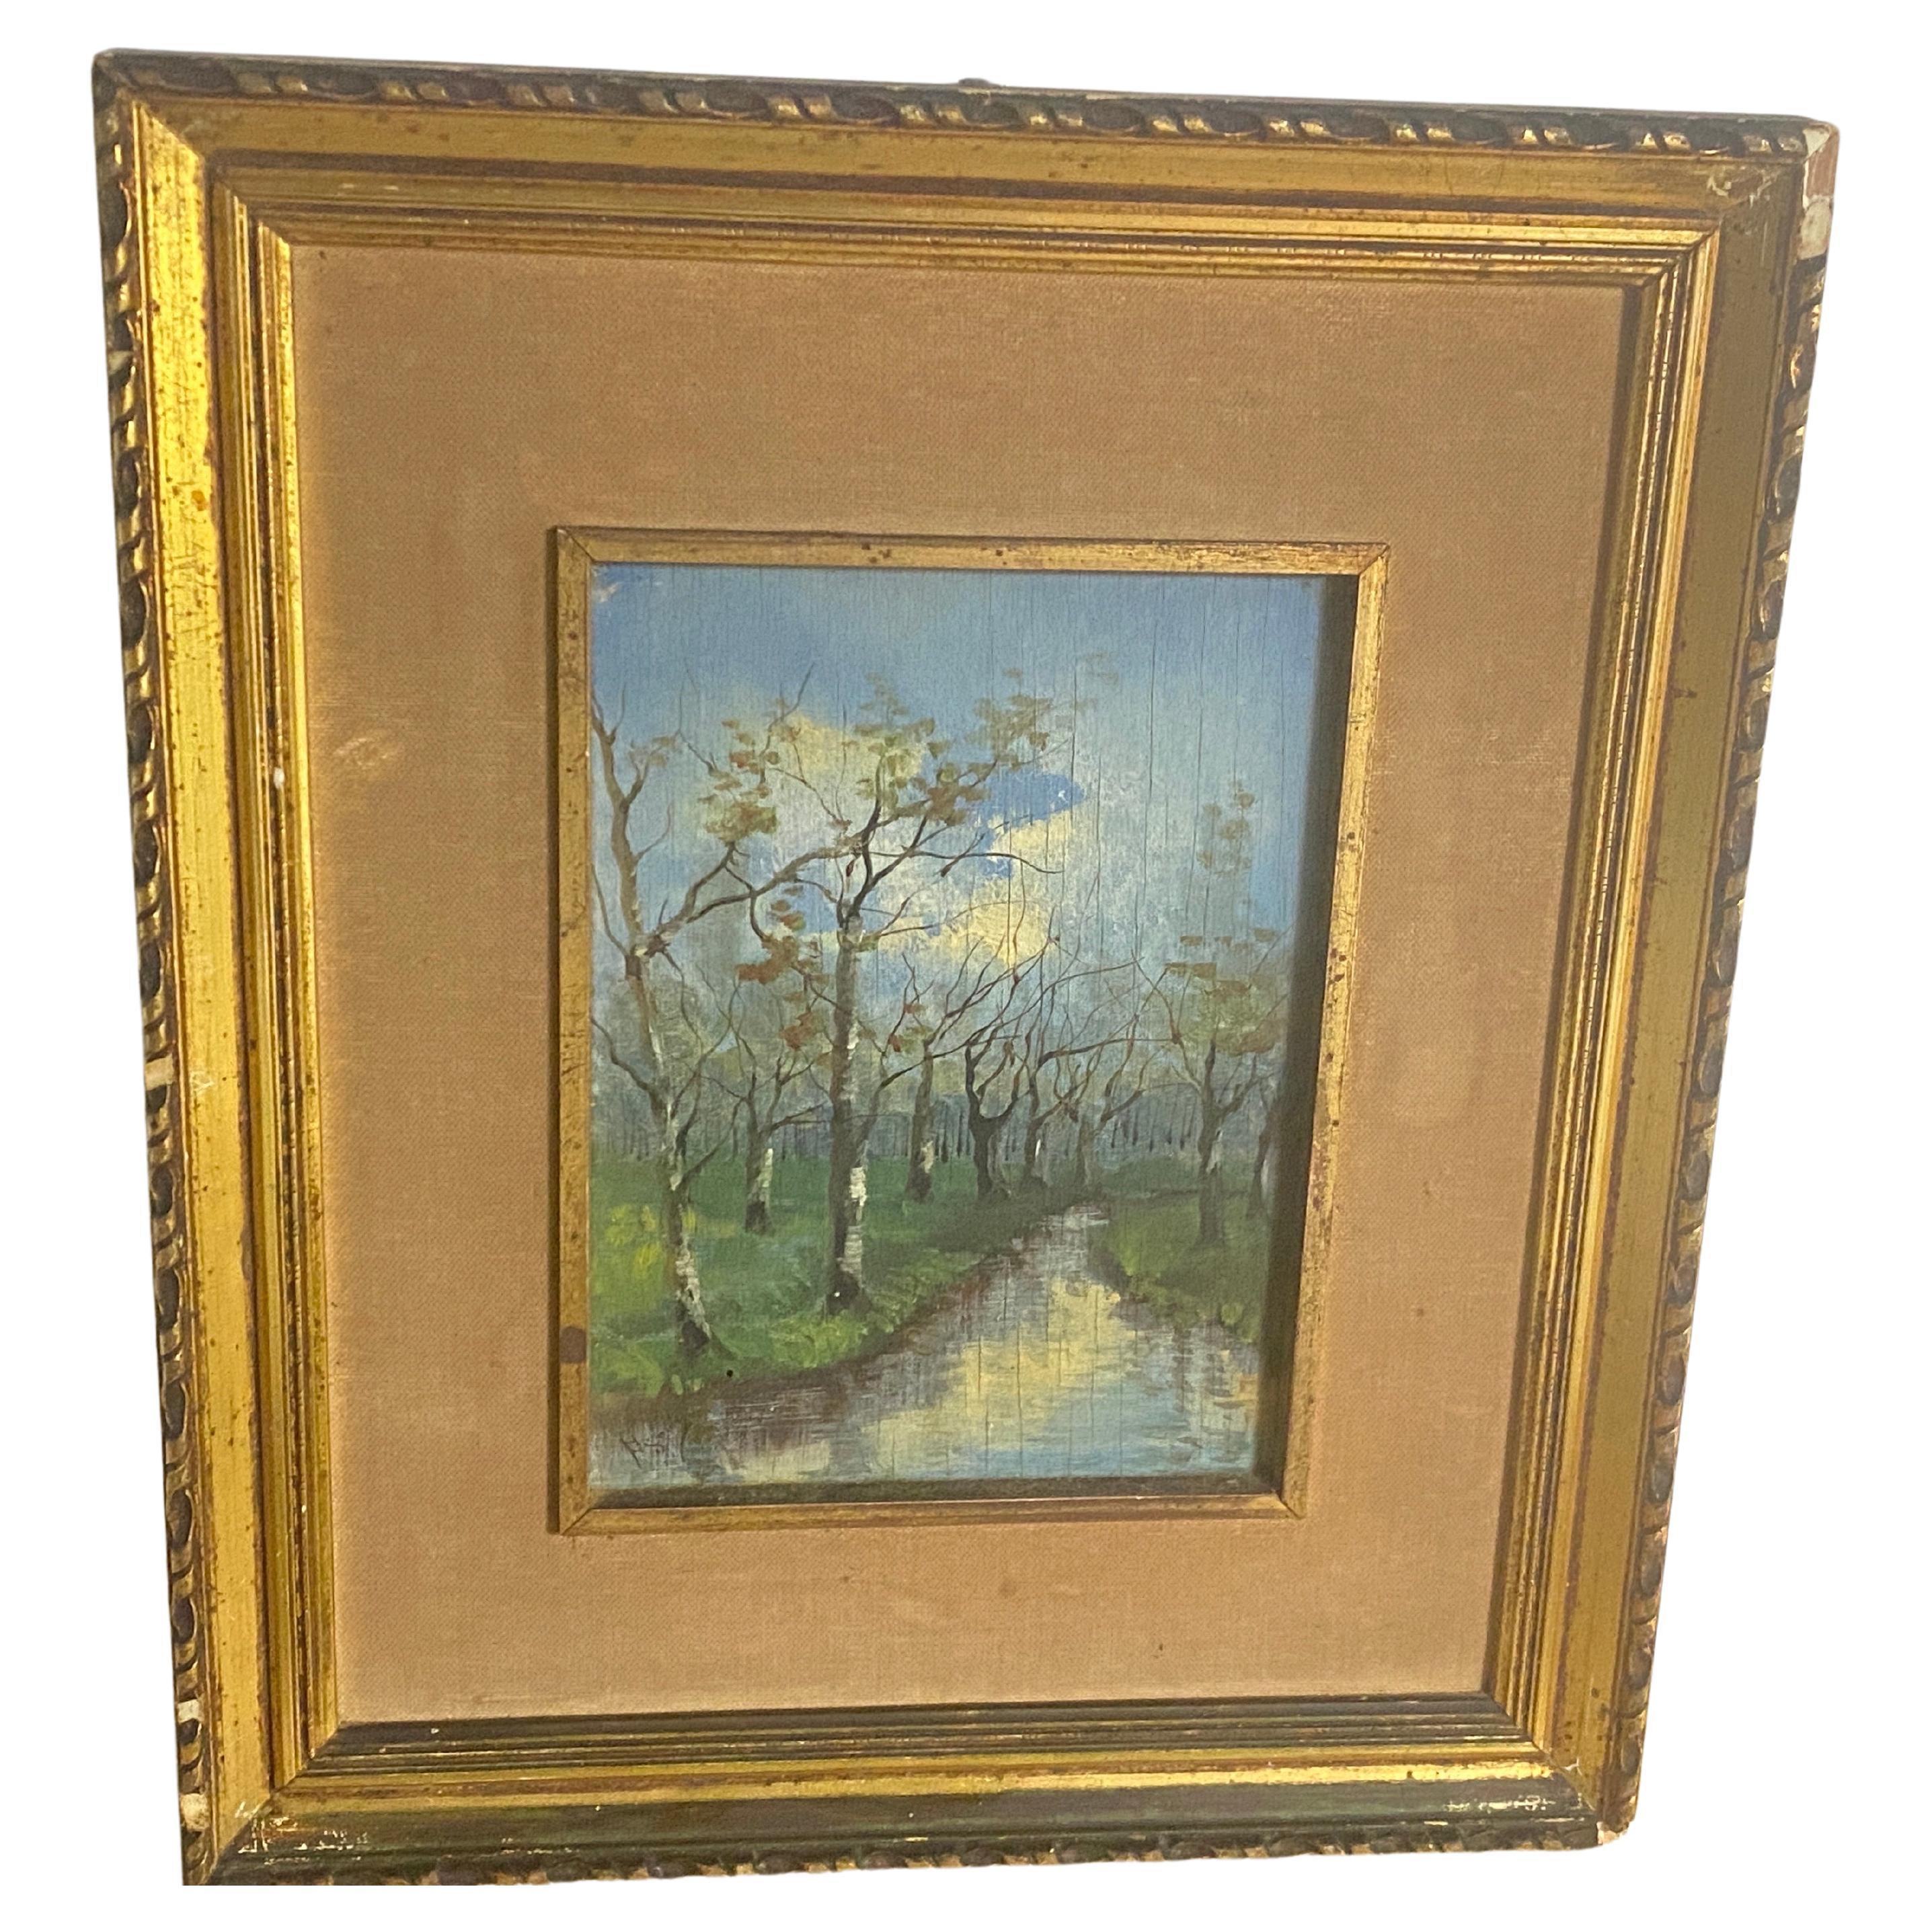 Original Oil Painting Representing a River and Trees Fance Early 20th Century For Sale